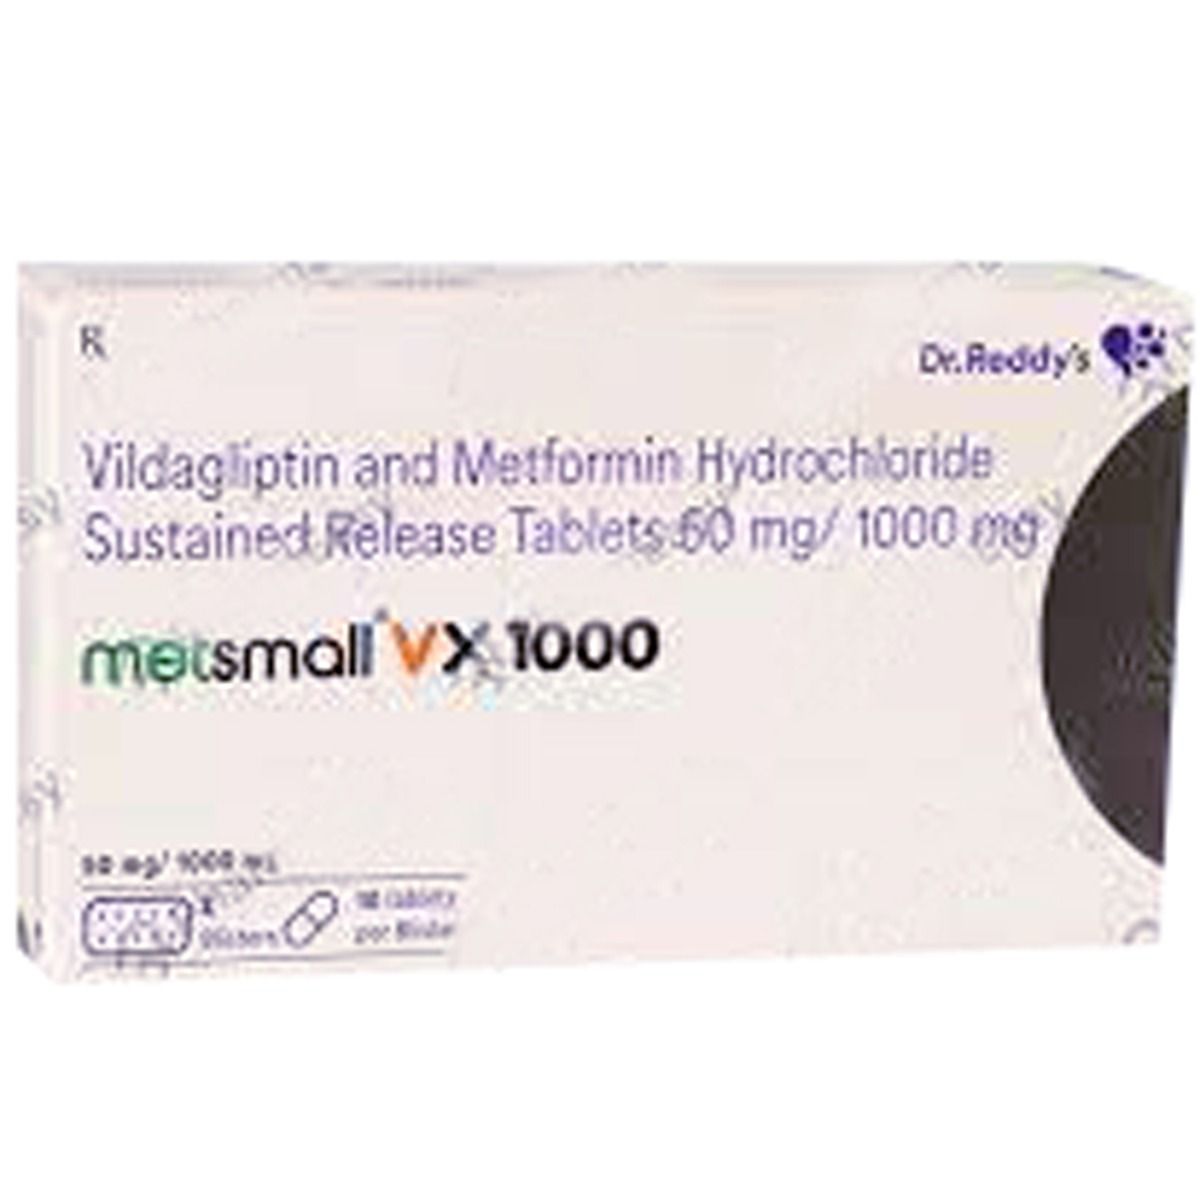 Metsmall VX 1000 Tablet 10's, Pack of 10 TABLETS